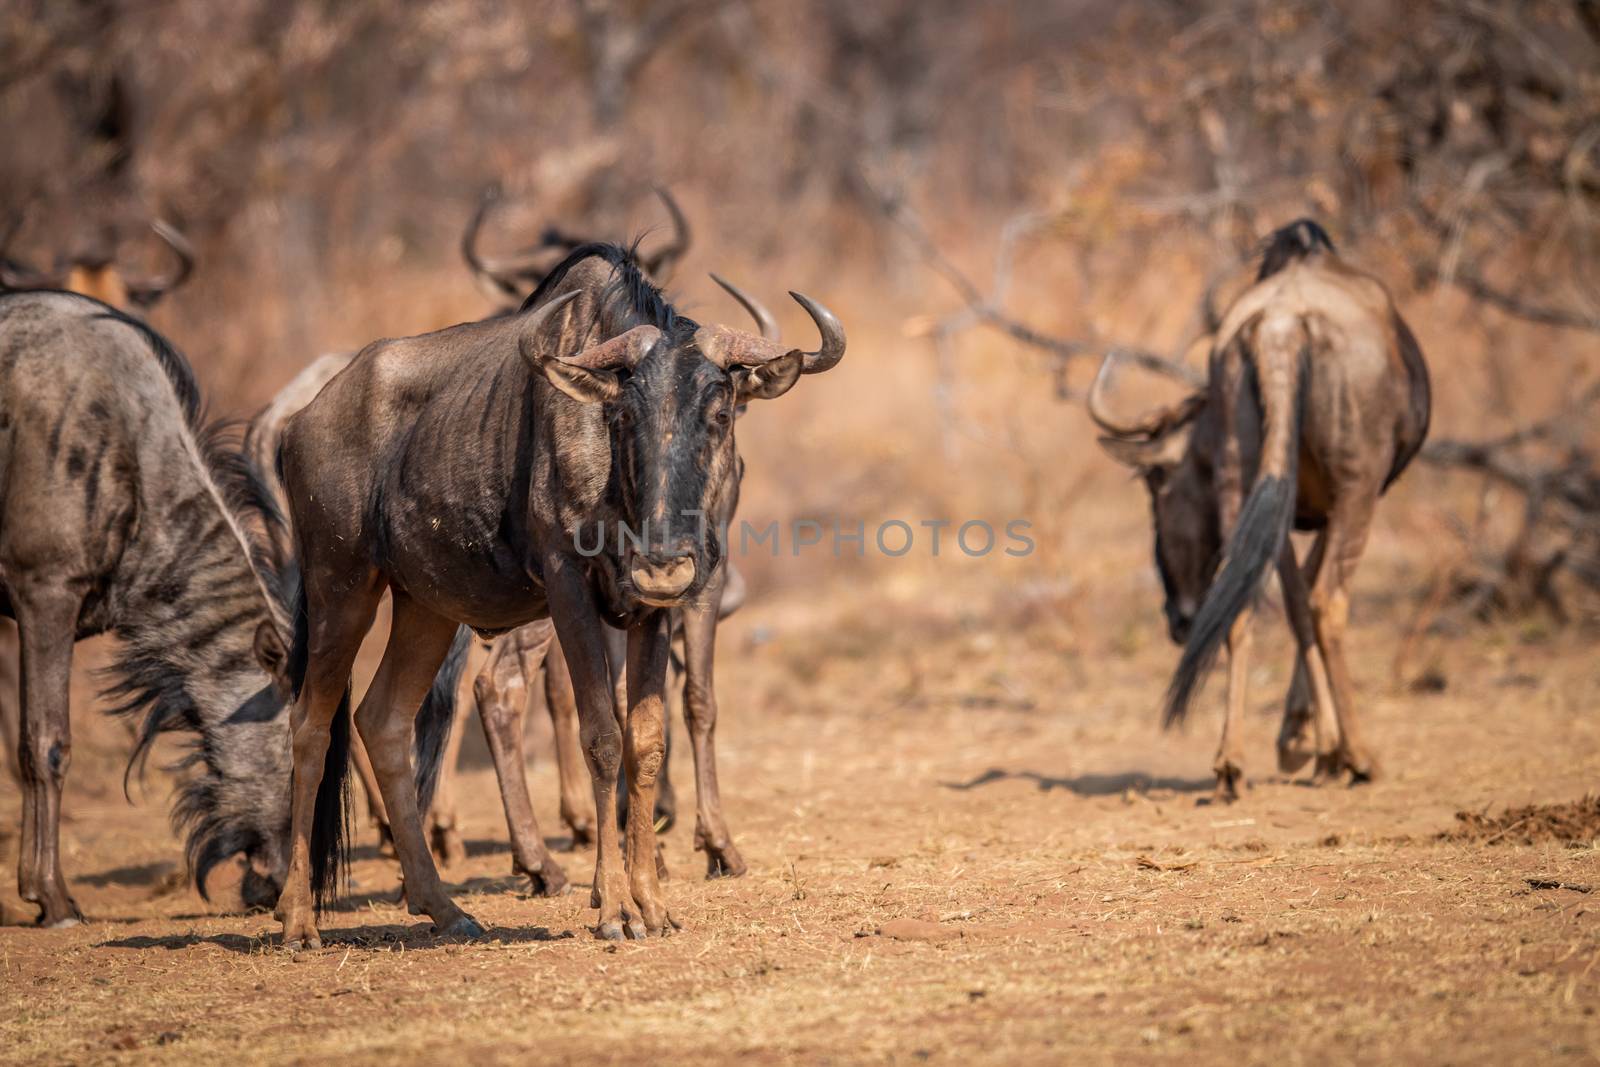 Blue wildebeest standing in the grass. by Simoneemanphotography